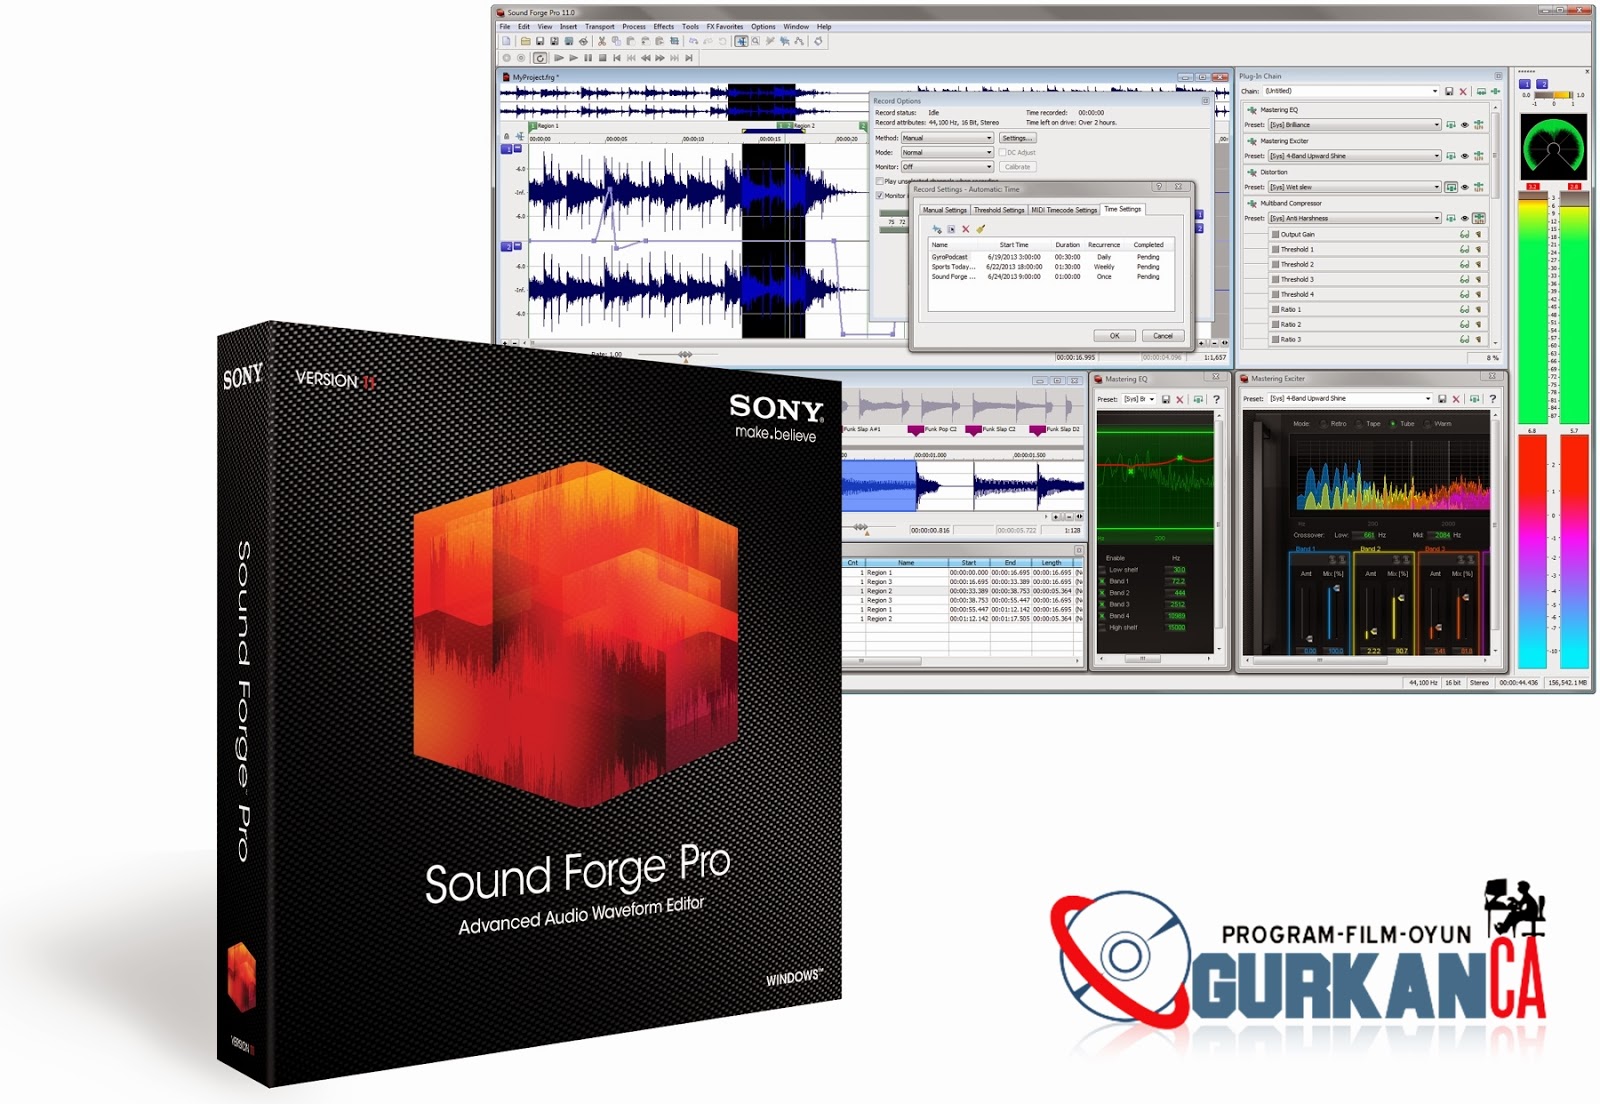 sound forge pro 11.0 serial number 17d